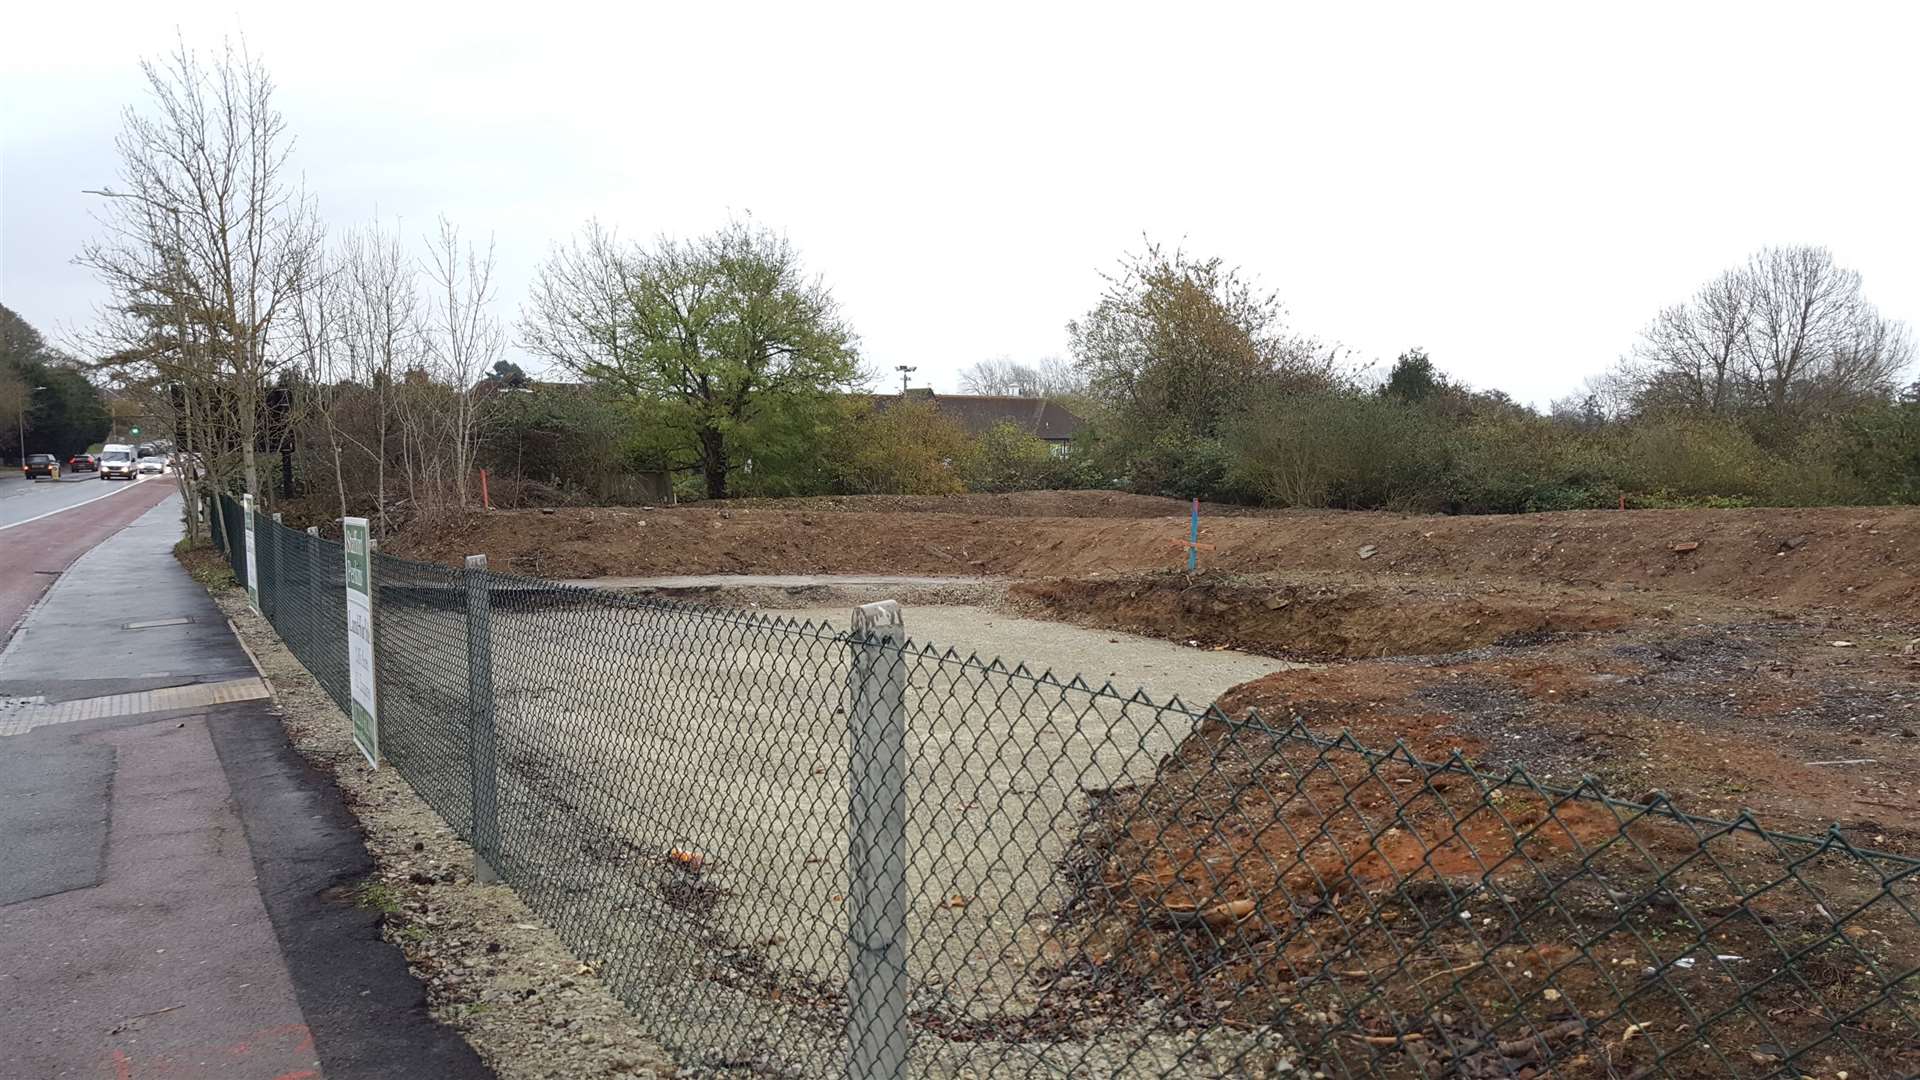 A 170-seat Miller & Carter steakhouse was planned for this site in Ashford before Aldi snapped it up